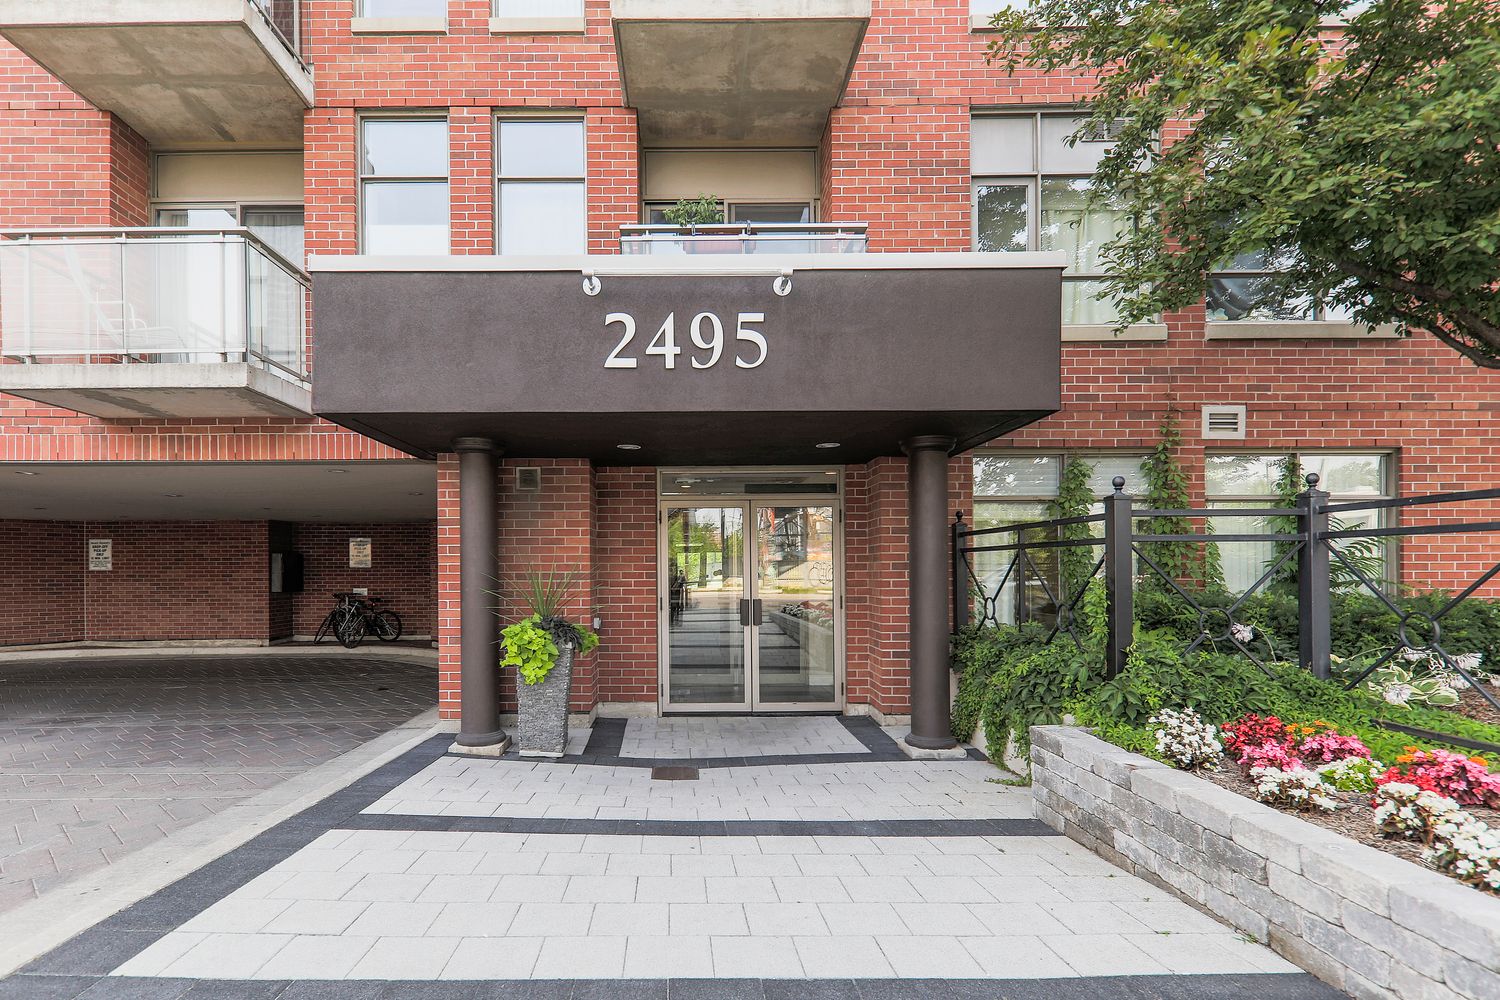 2495 Dundas Street W. Glen Lake Condos is located in  West End, Toronto - image #4 of 4